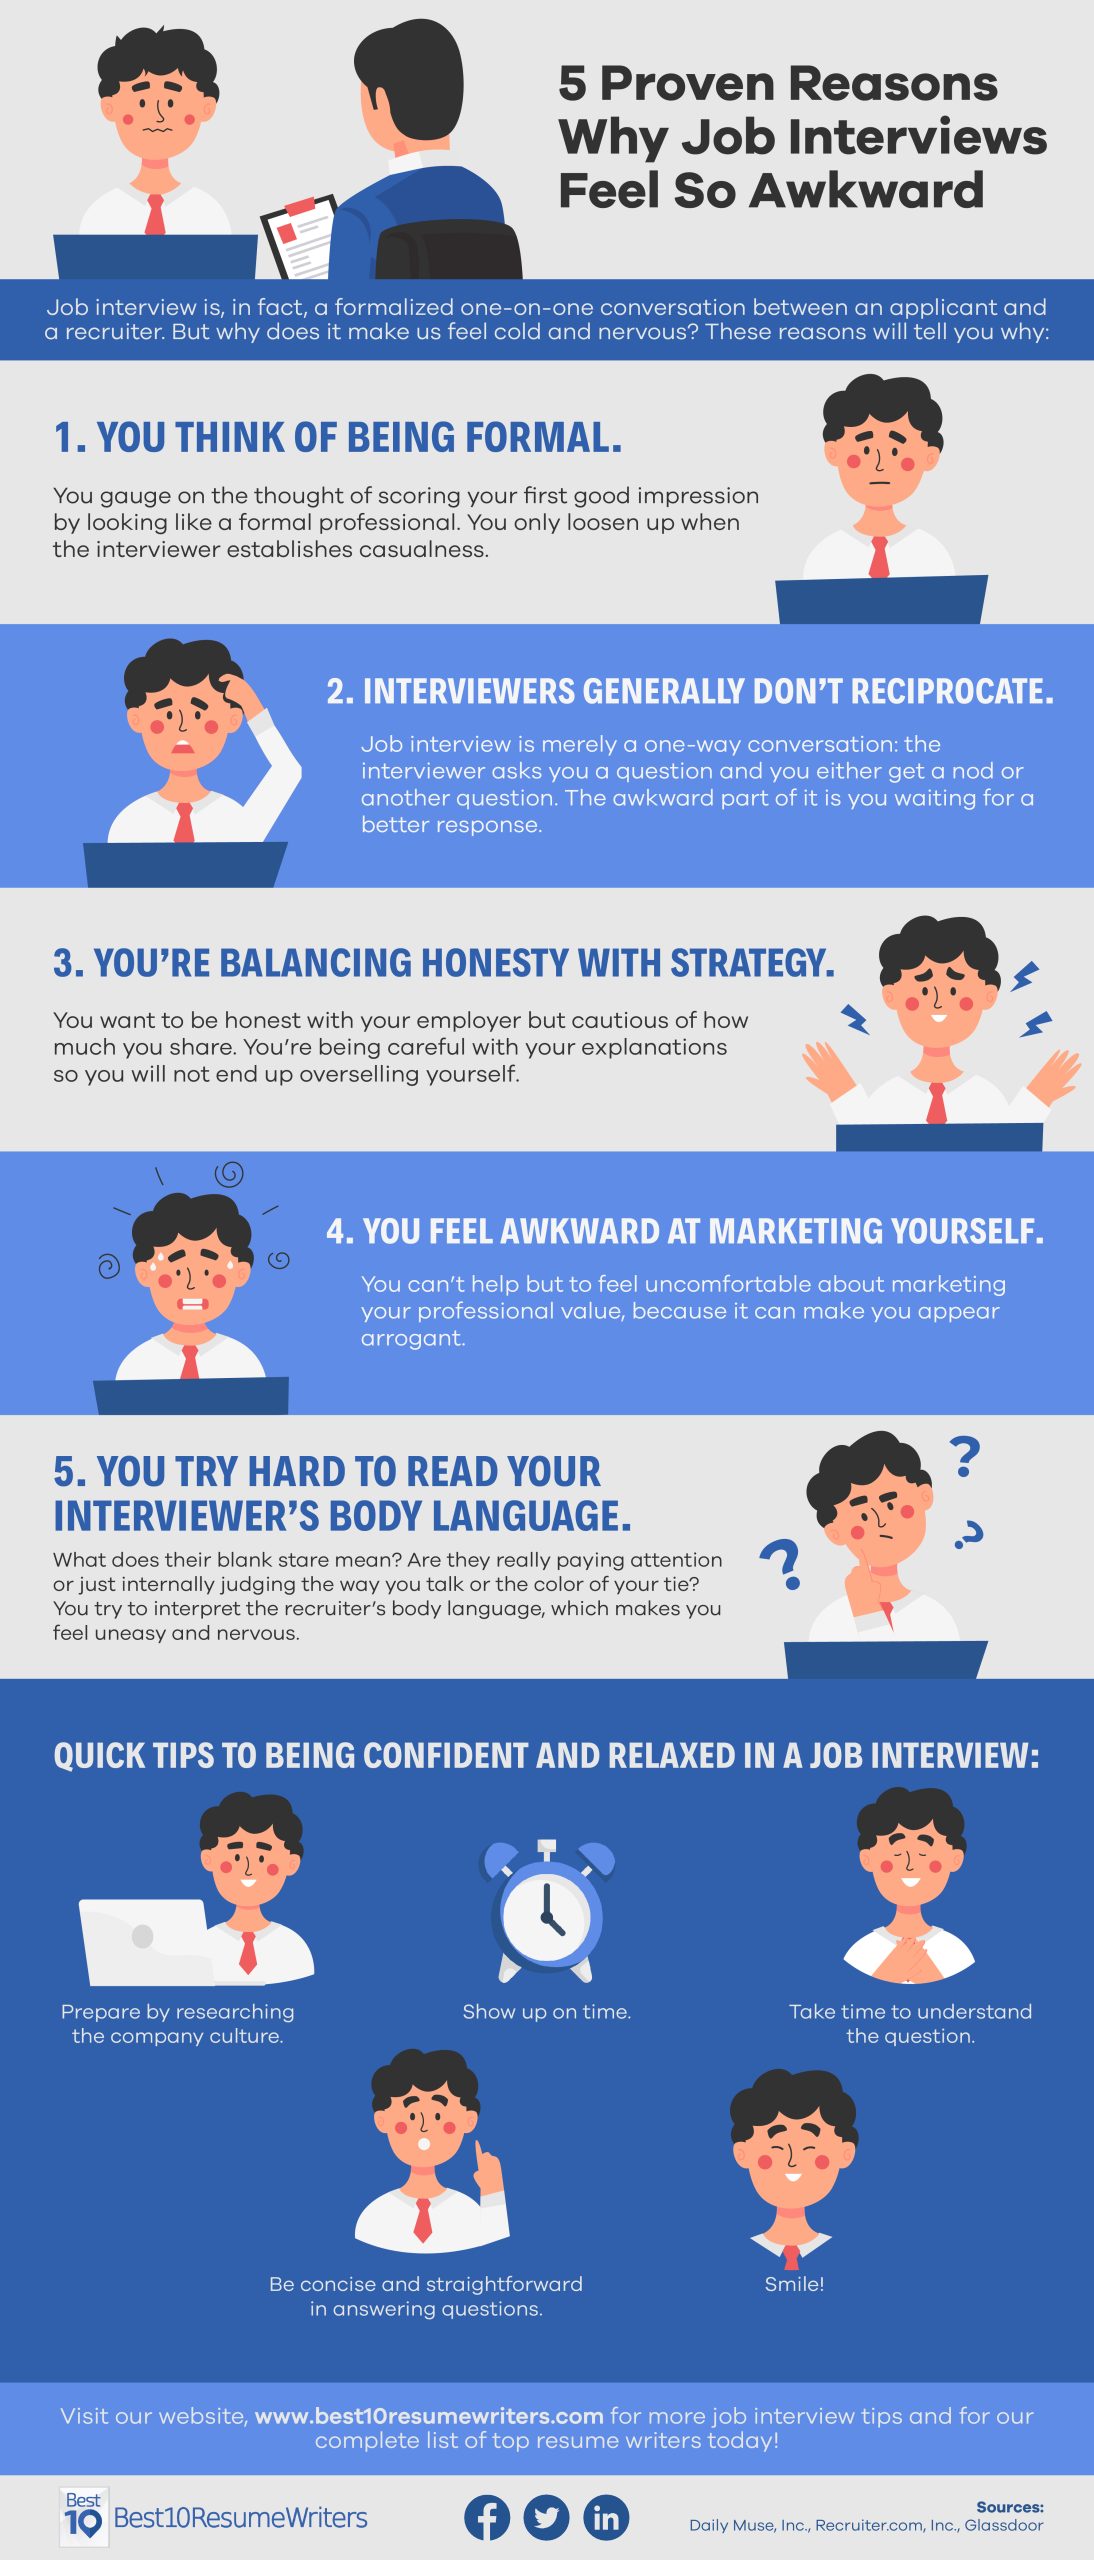 5 proven reasons why job interviews feel so awkward infographic